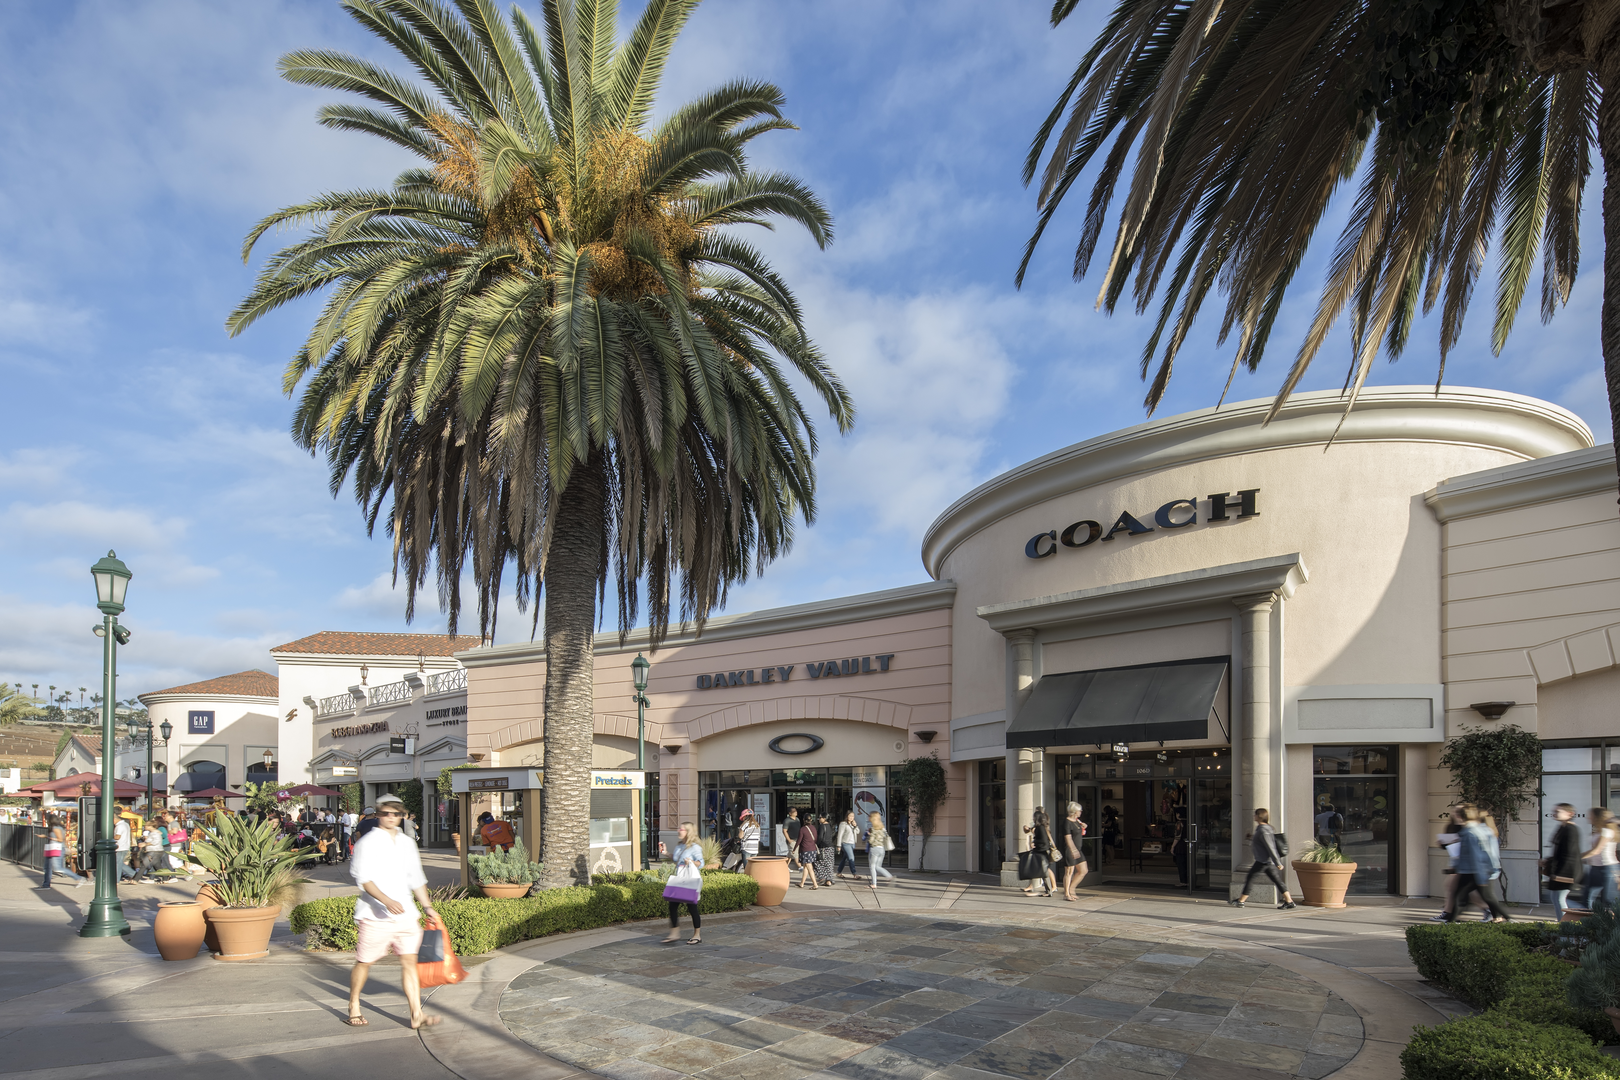 The Best Malls for Serious Shopping in Northern Virginia